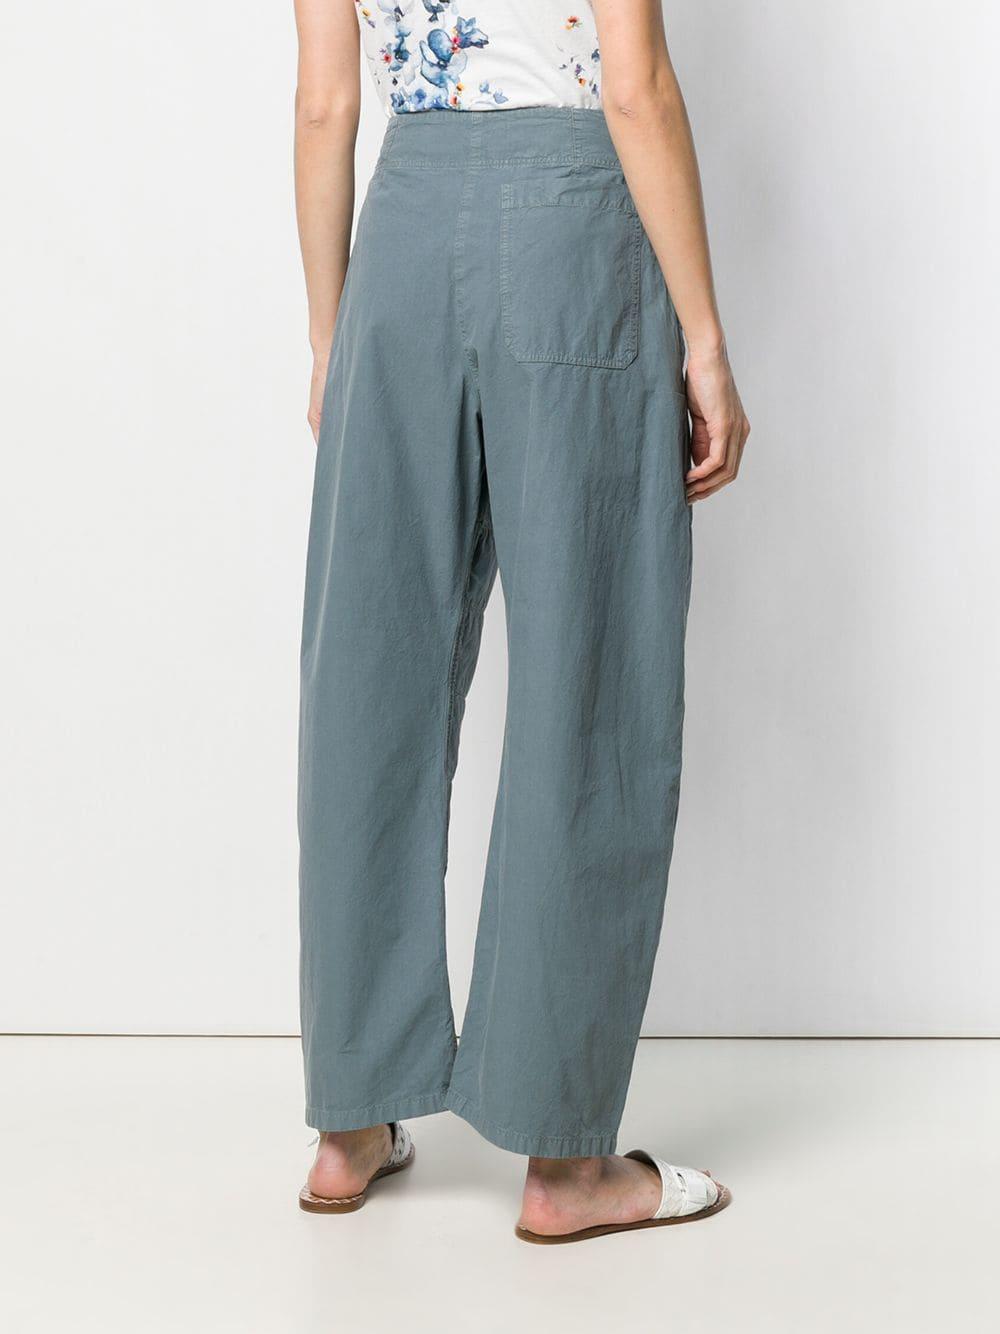 Lemaire Tapered Trousers in Gray - Lyst